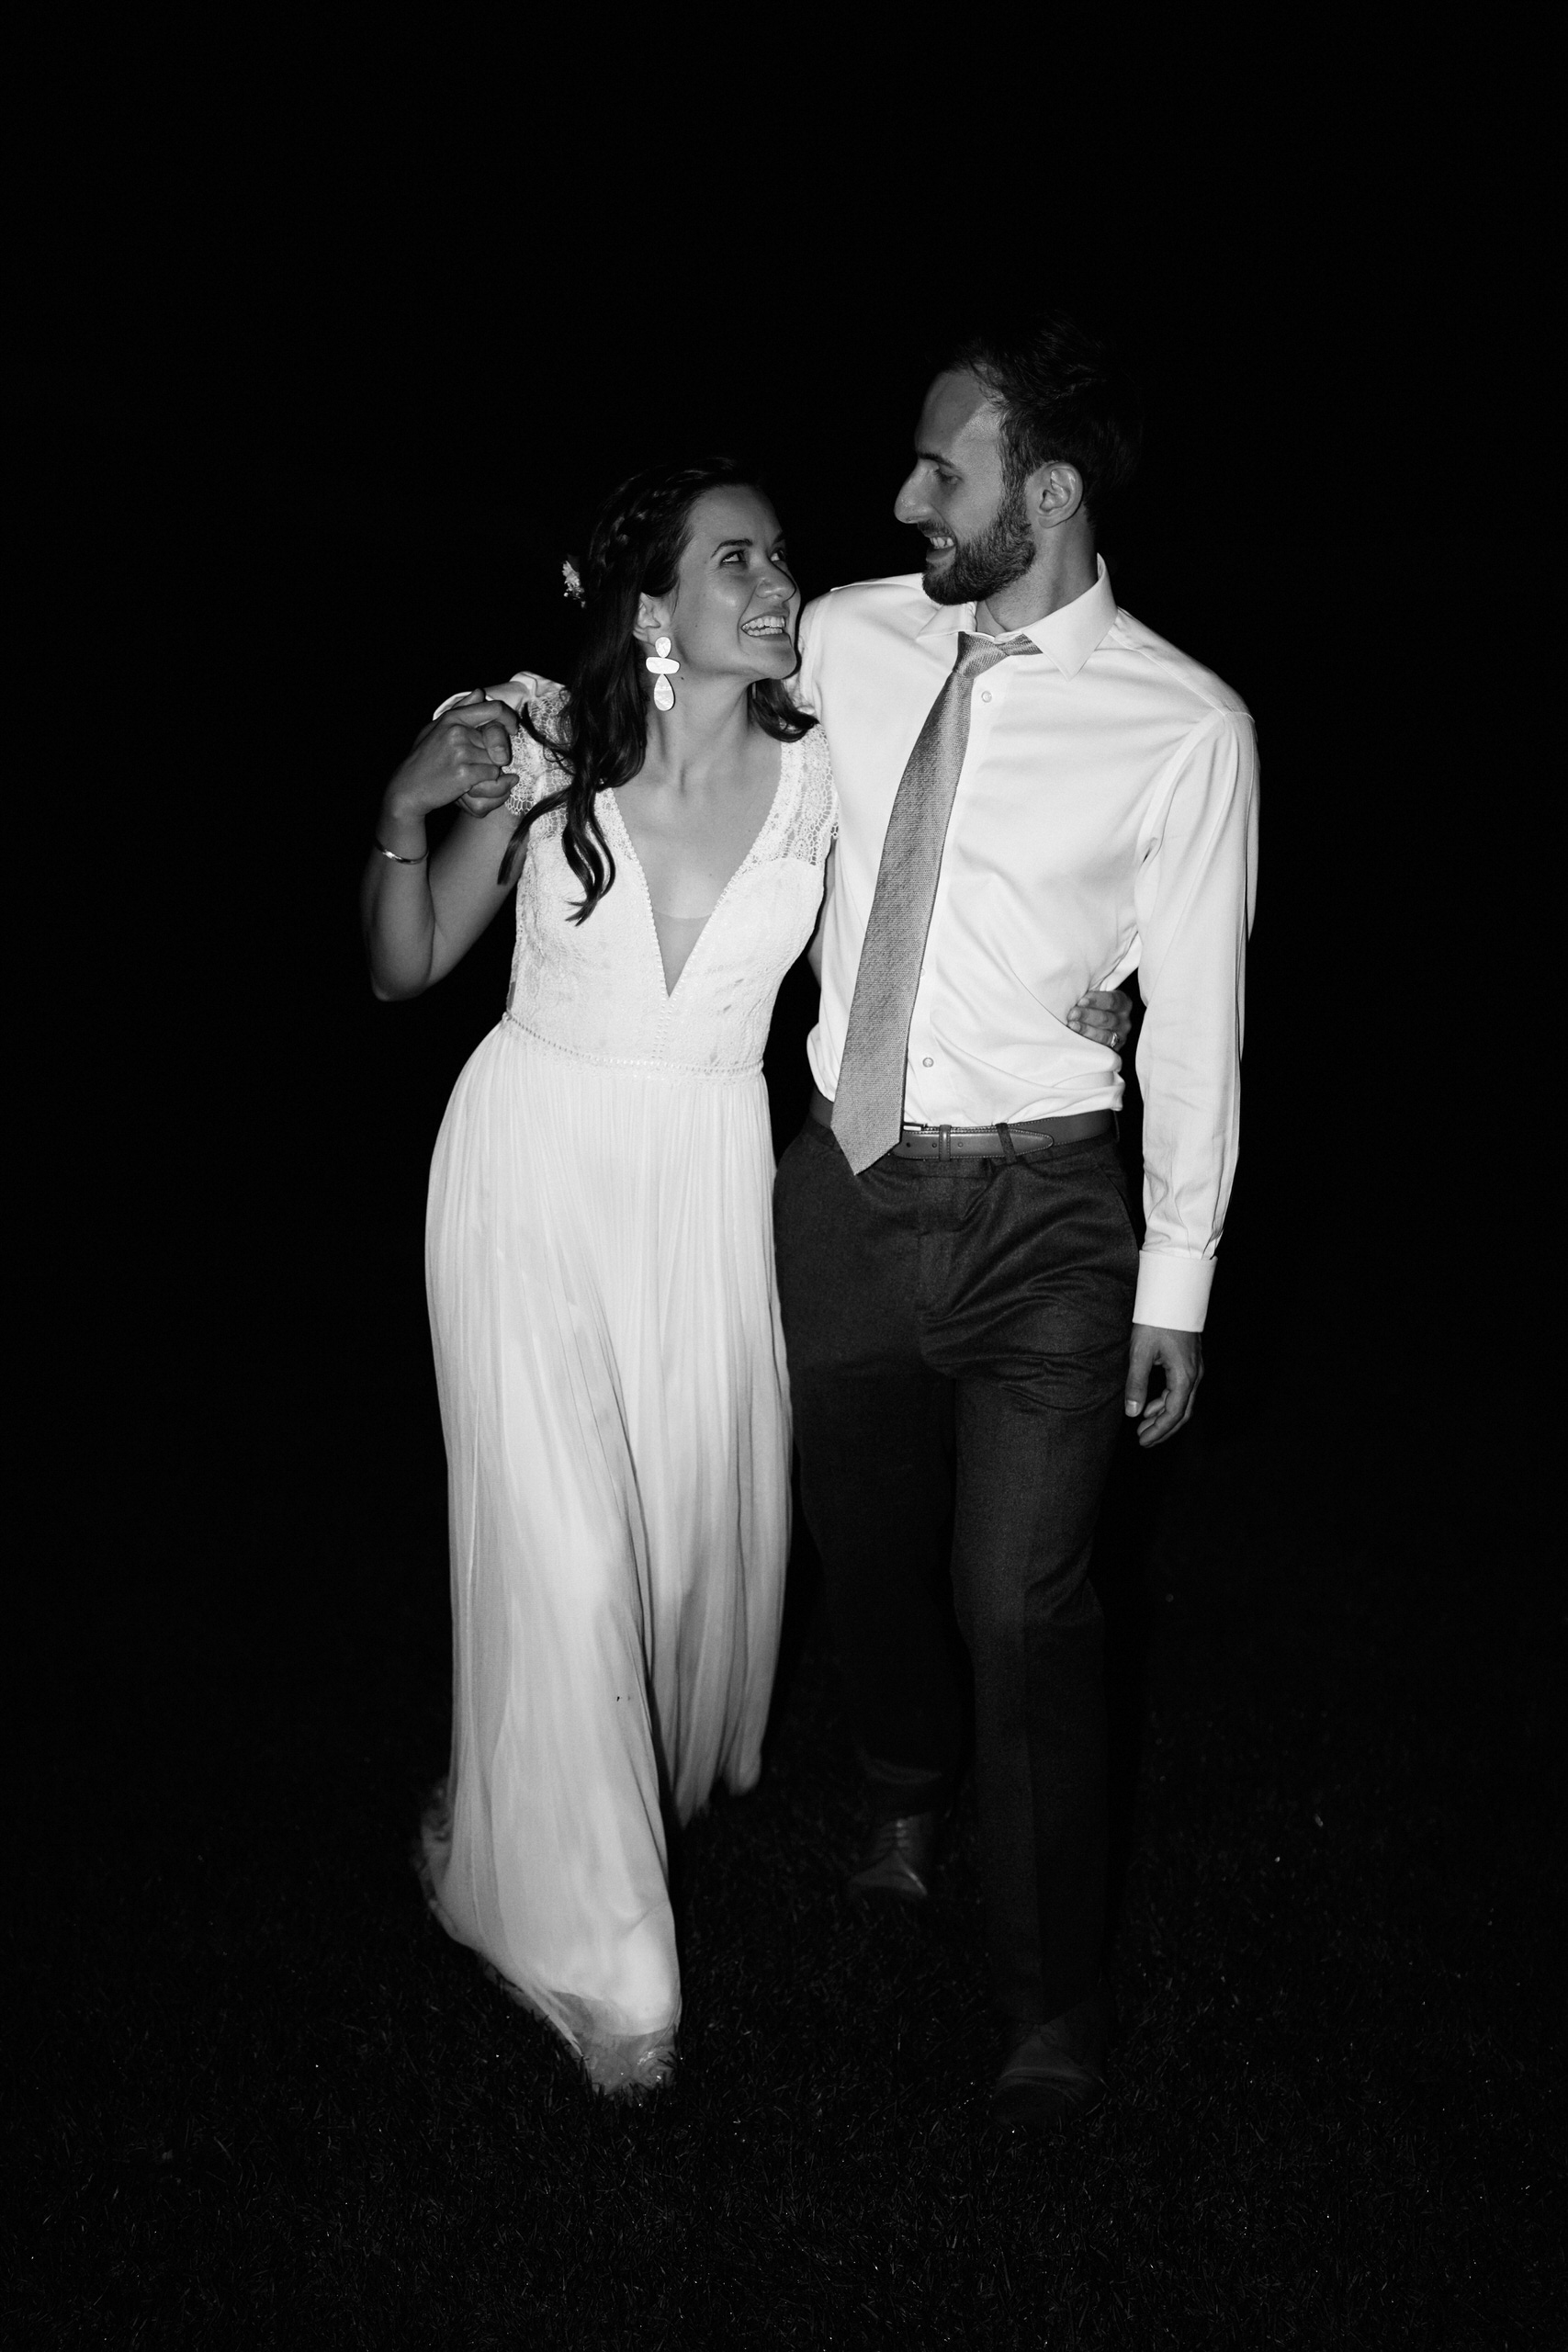 A picture in black and white of a couple on their wedding day.